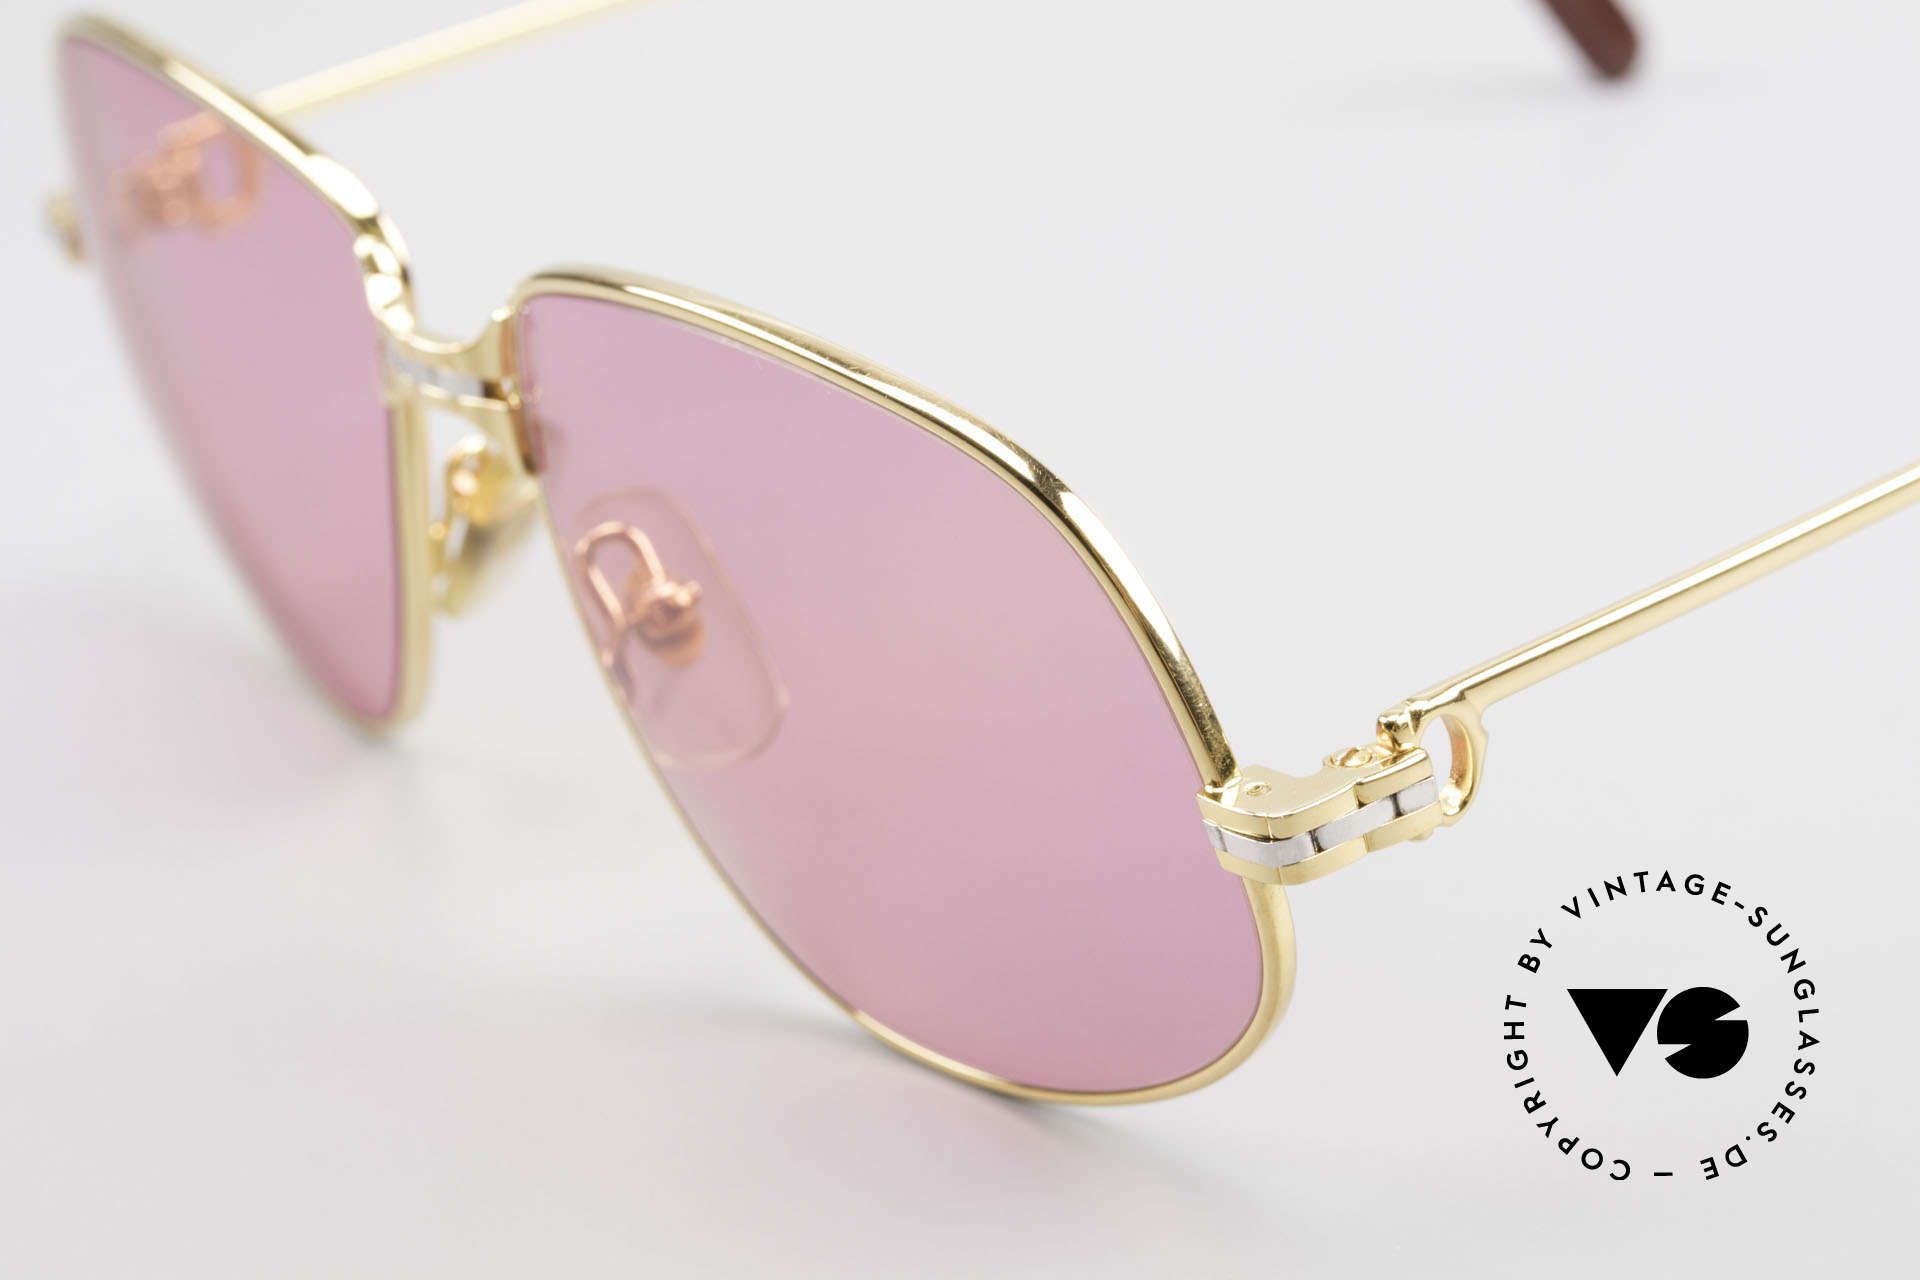 Cartier Panthere G.M. - M Pink Glasses With Chanel Case, 22ct gold-plated frame with new pink sun lenses, 100% UV, Made for Men and Women